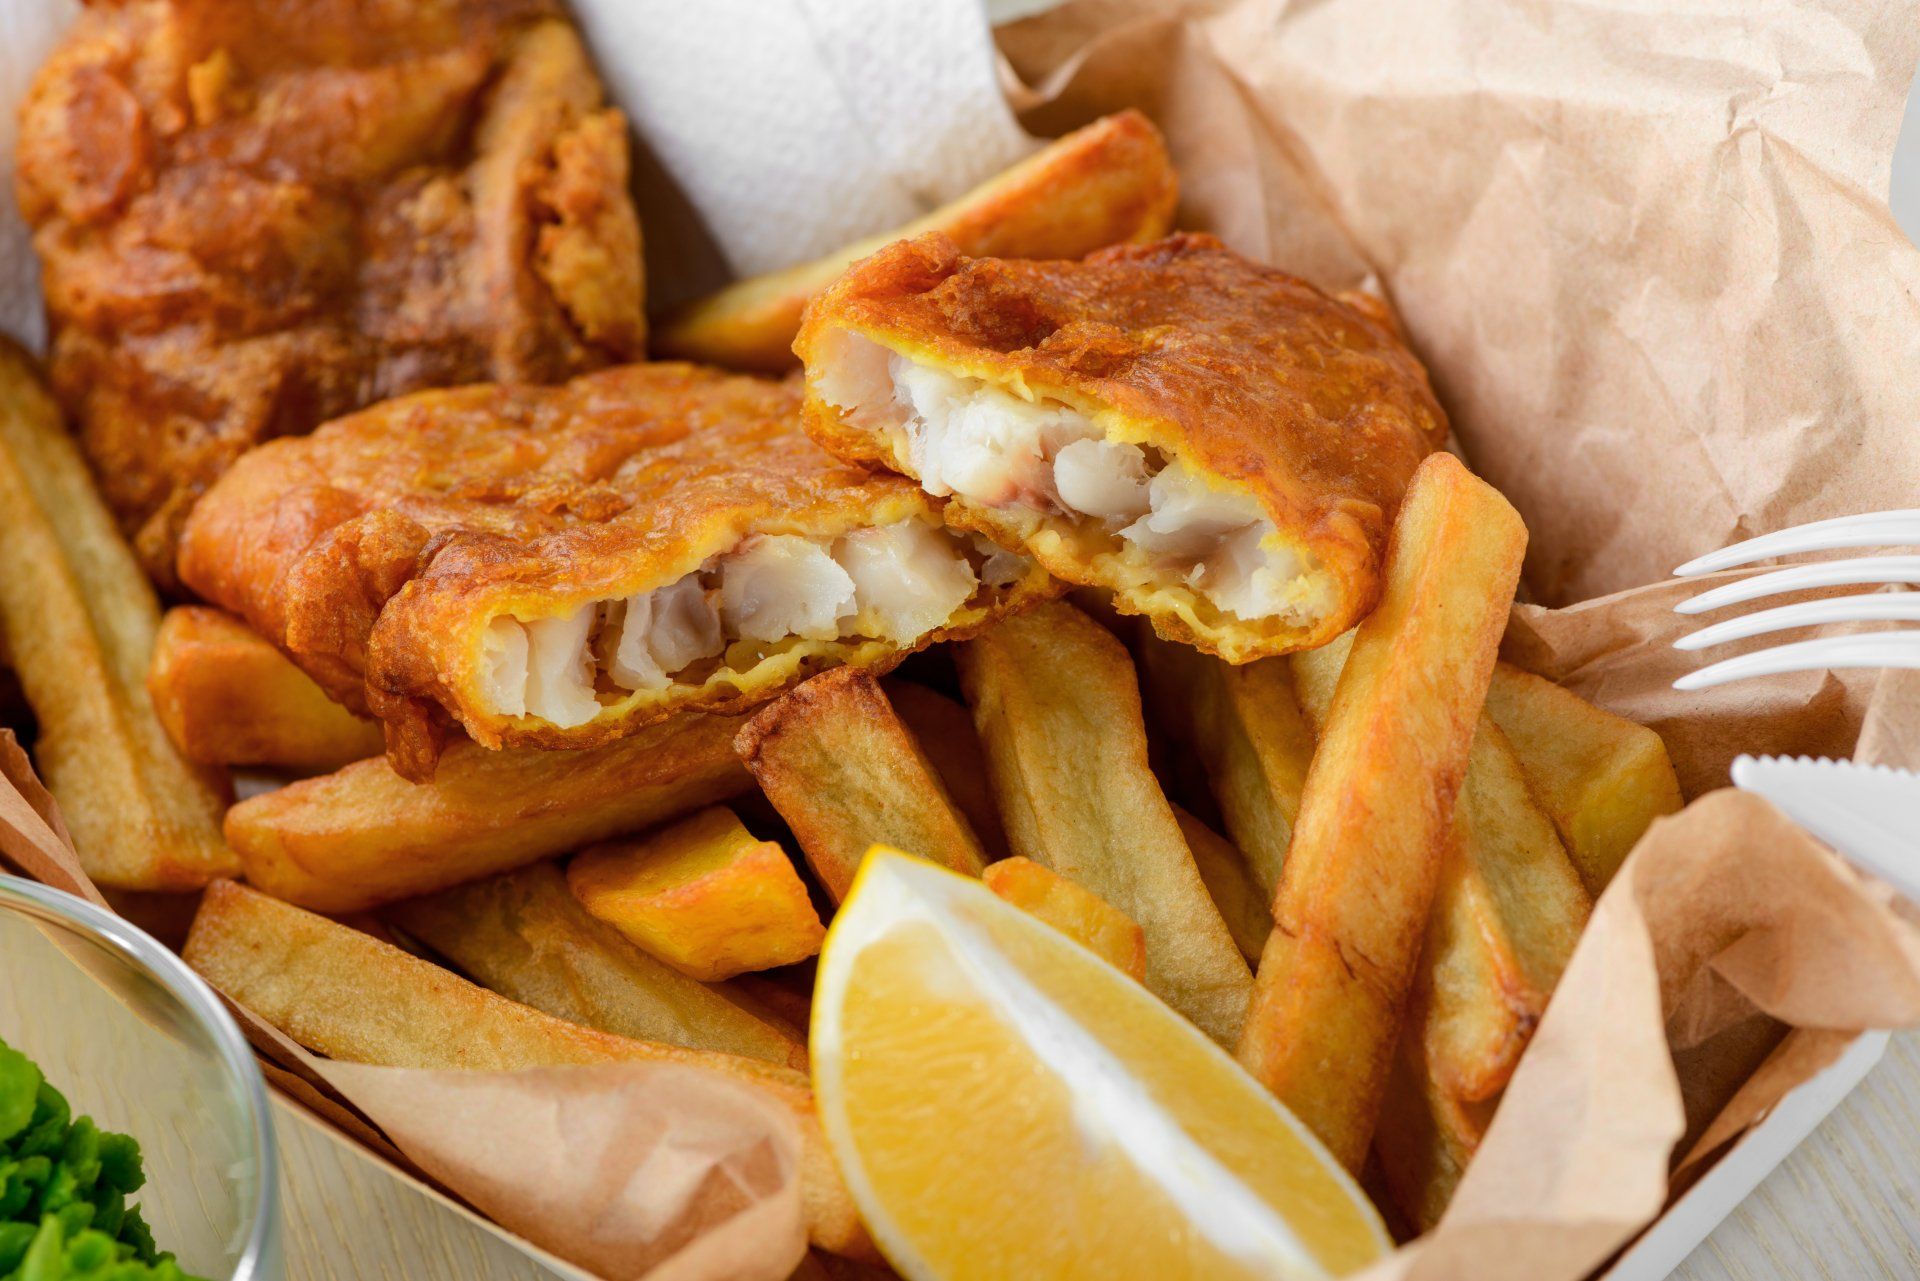 Fish and Chip key facts